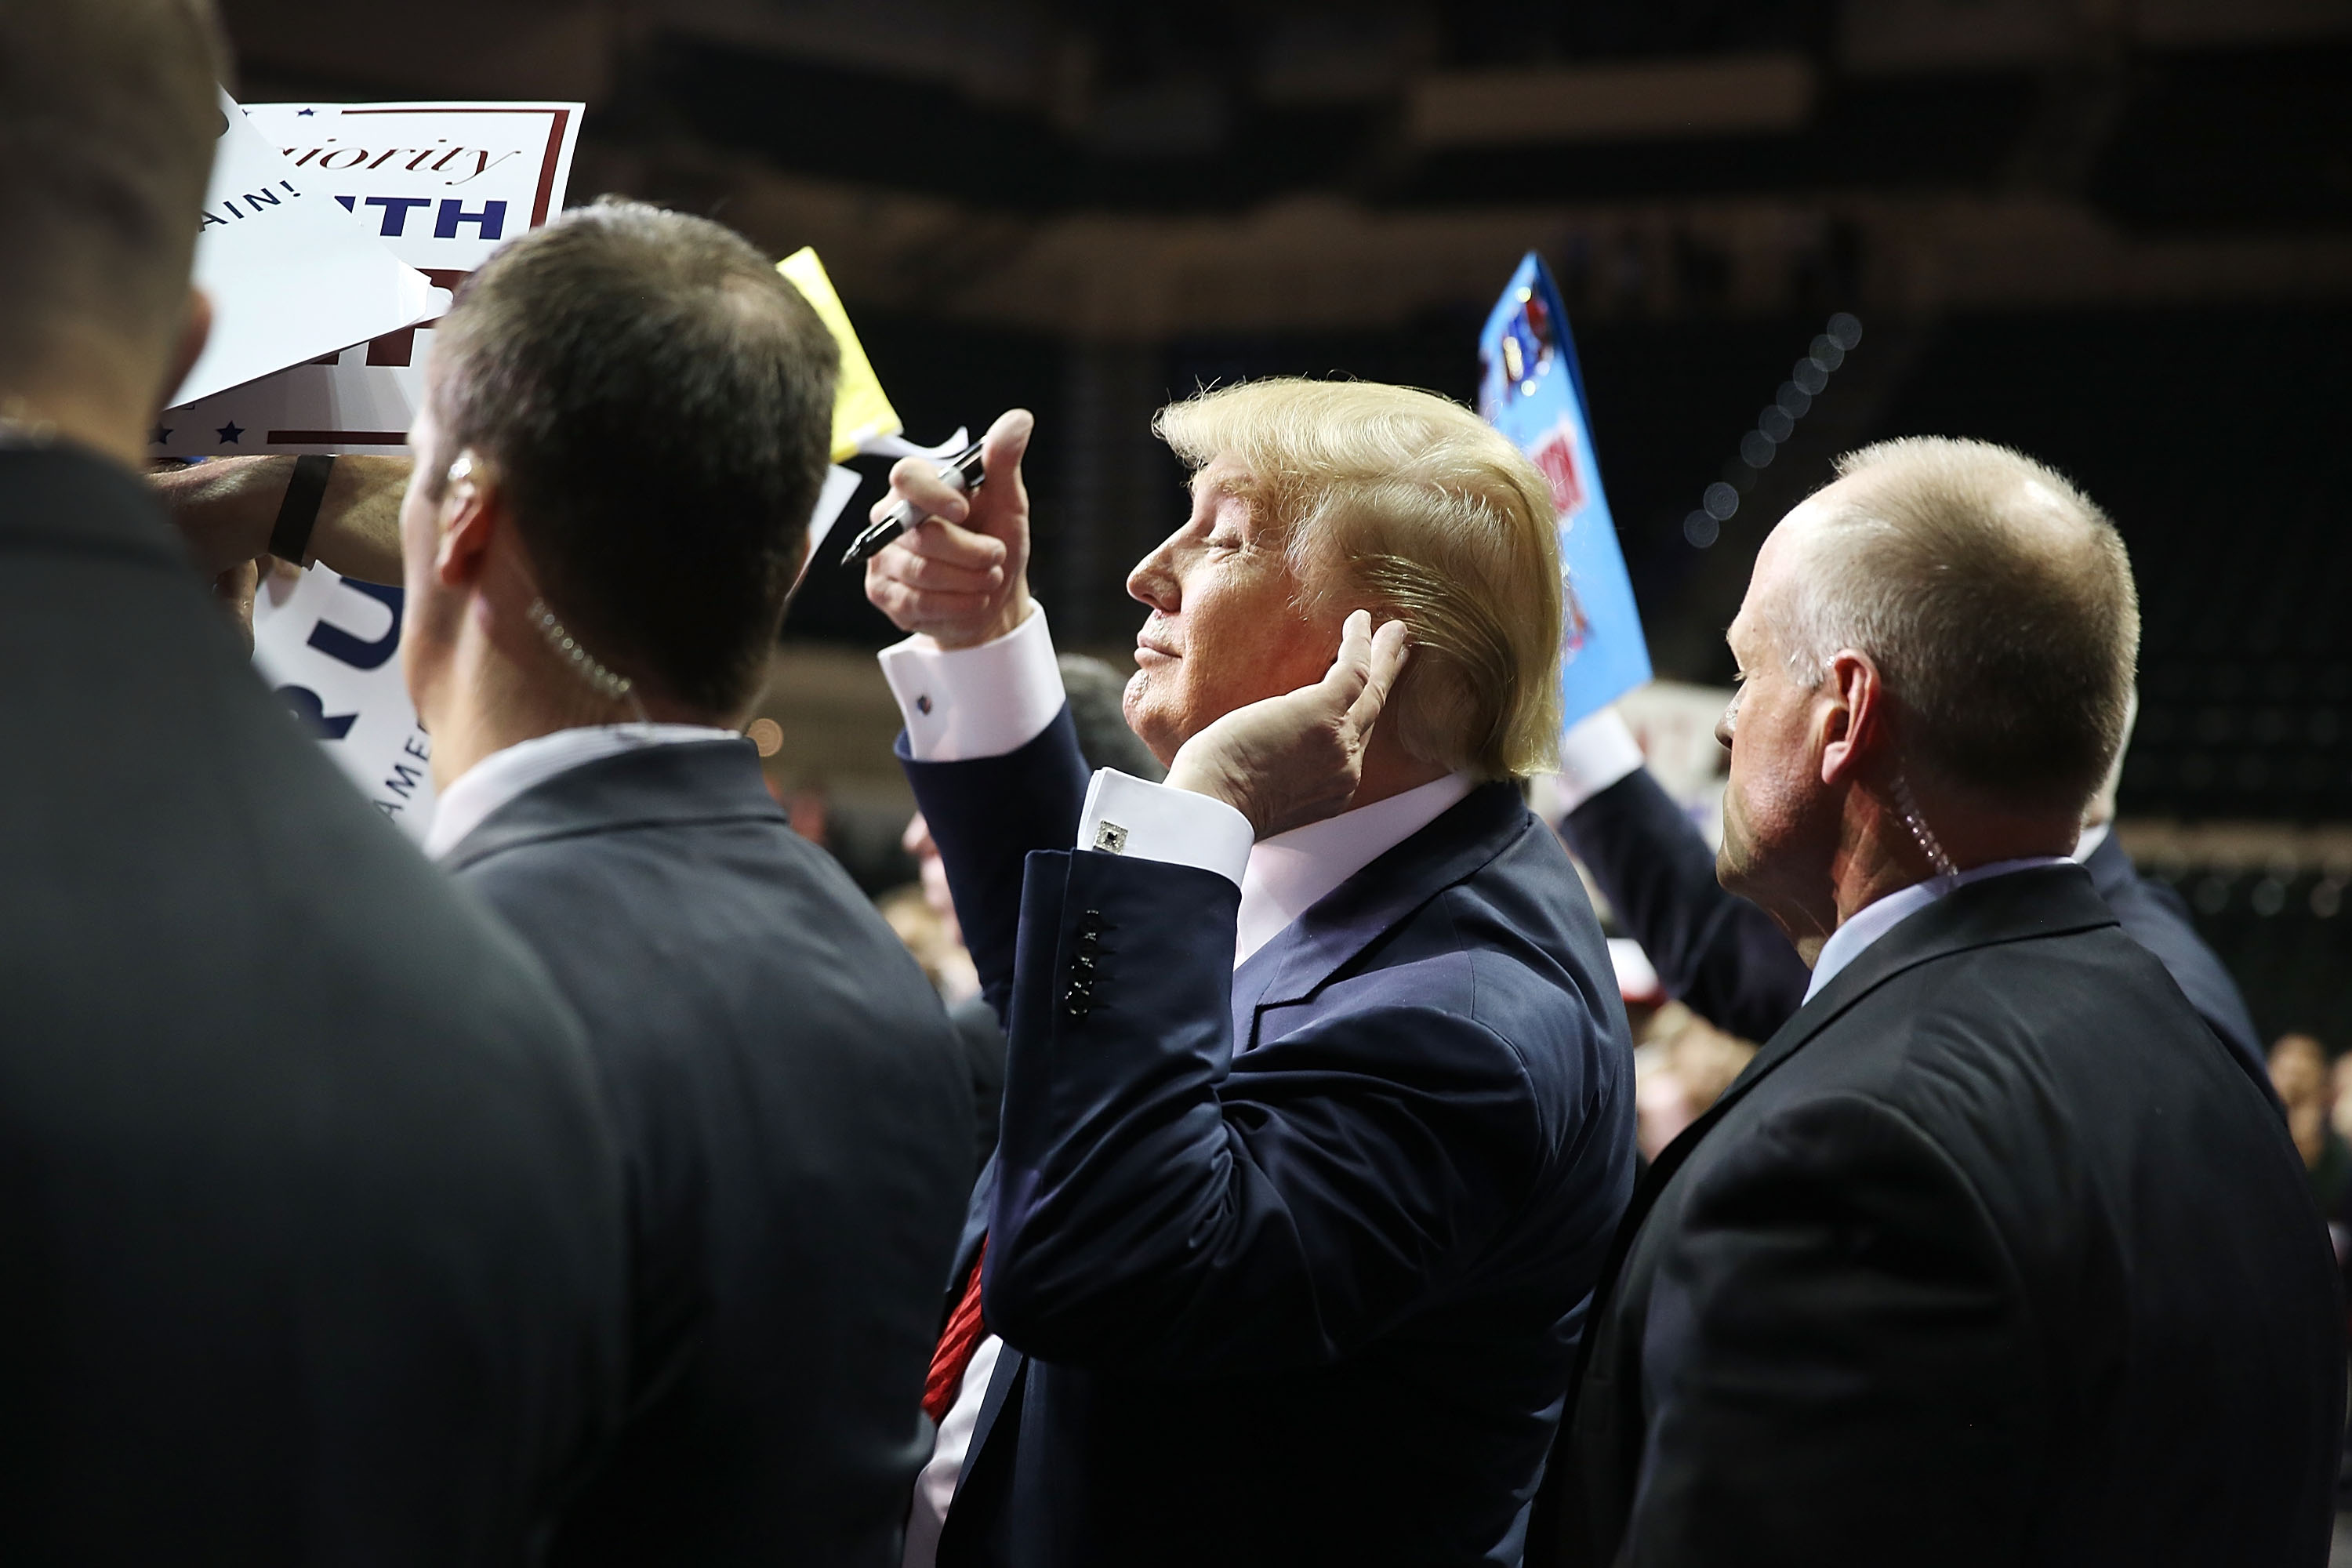 Donald Trump greets people during a campaign rally in Tampa, Florida on Feb. 12, 2016. (Joe Raedle—Getty Images)